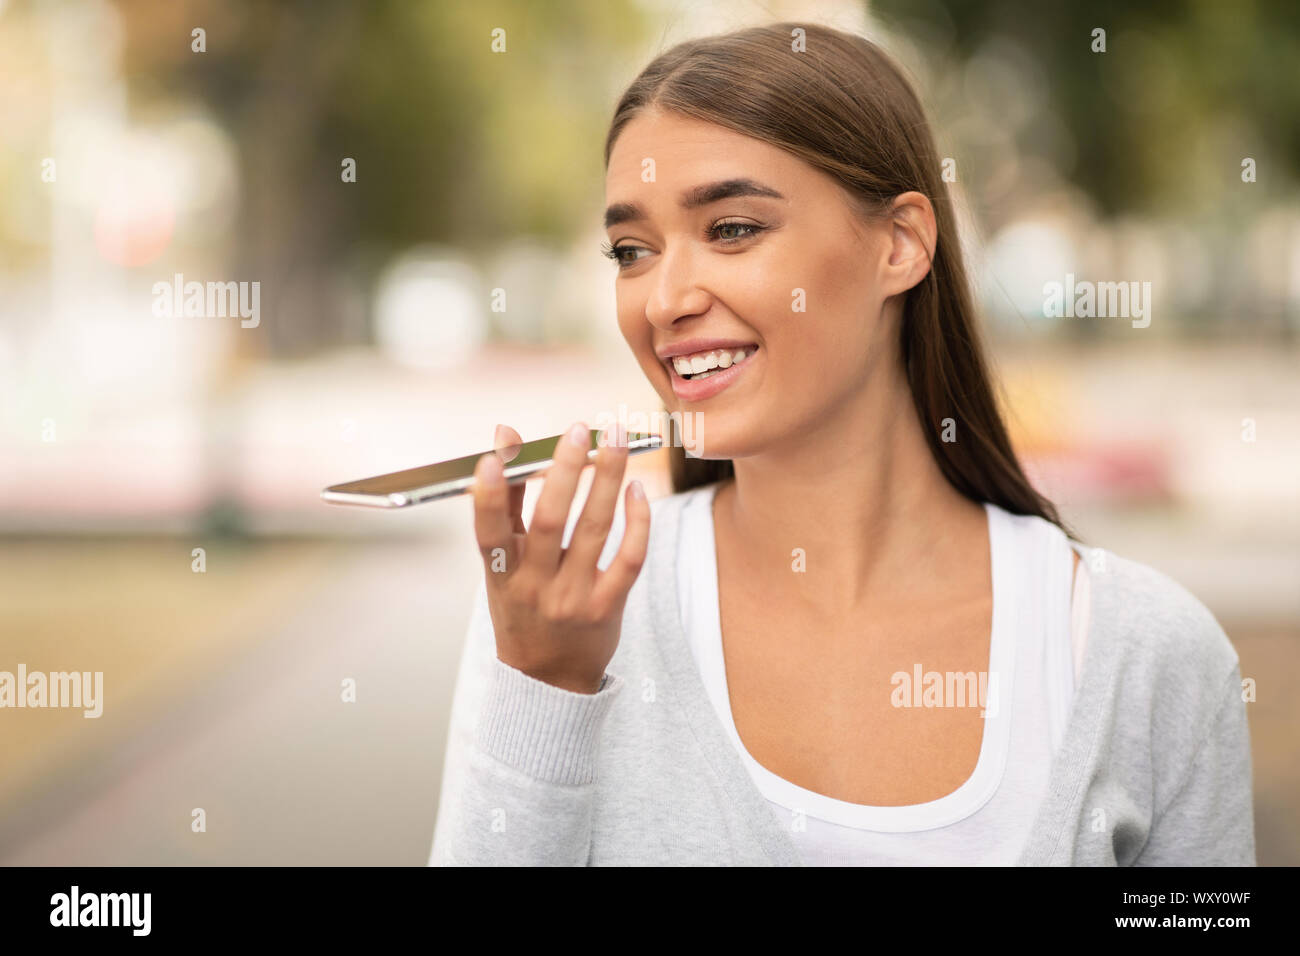 Woman using digital voice assistant on cellphone outdoor Stock Photo